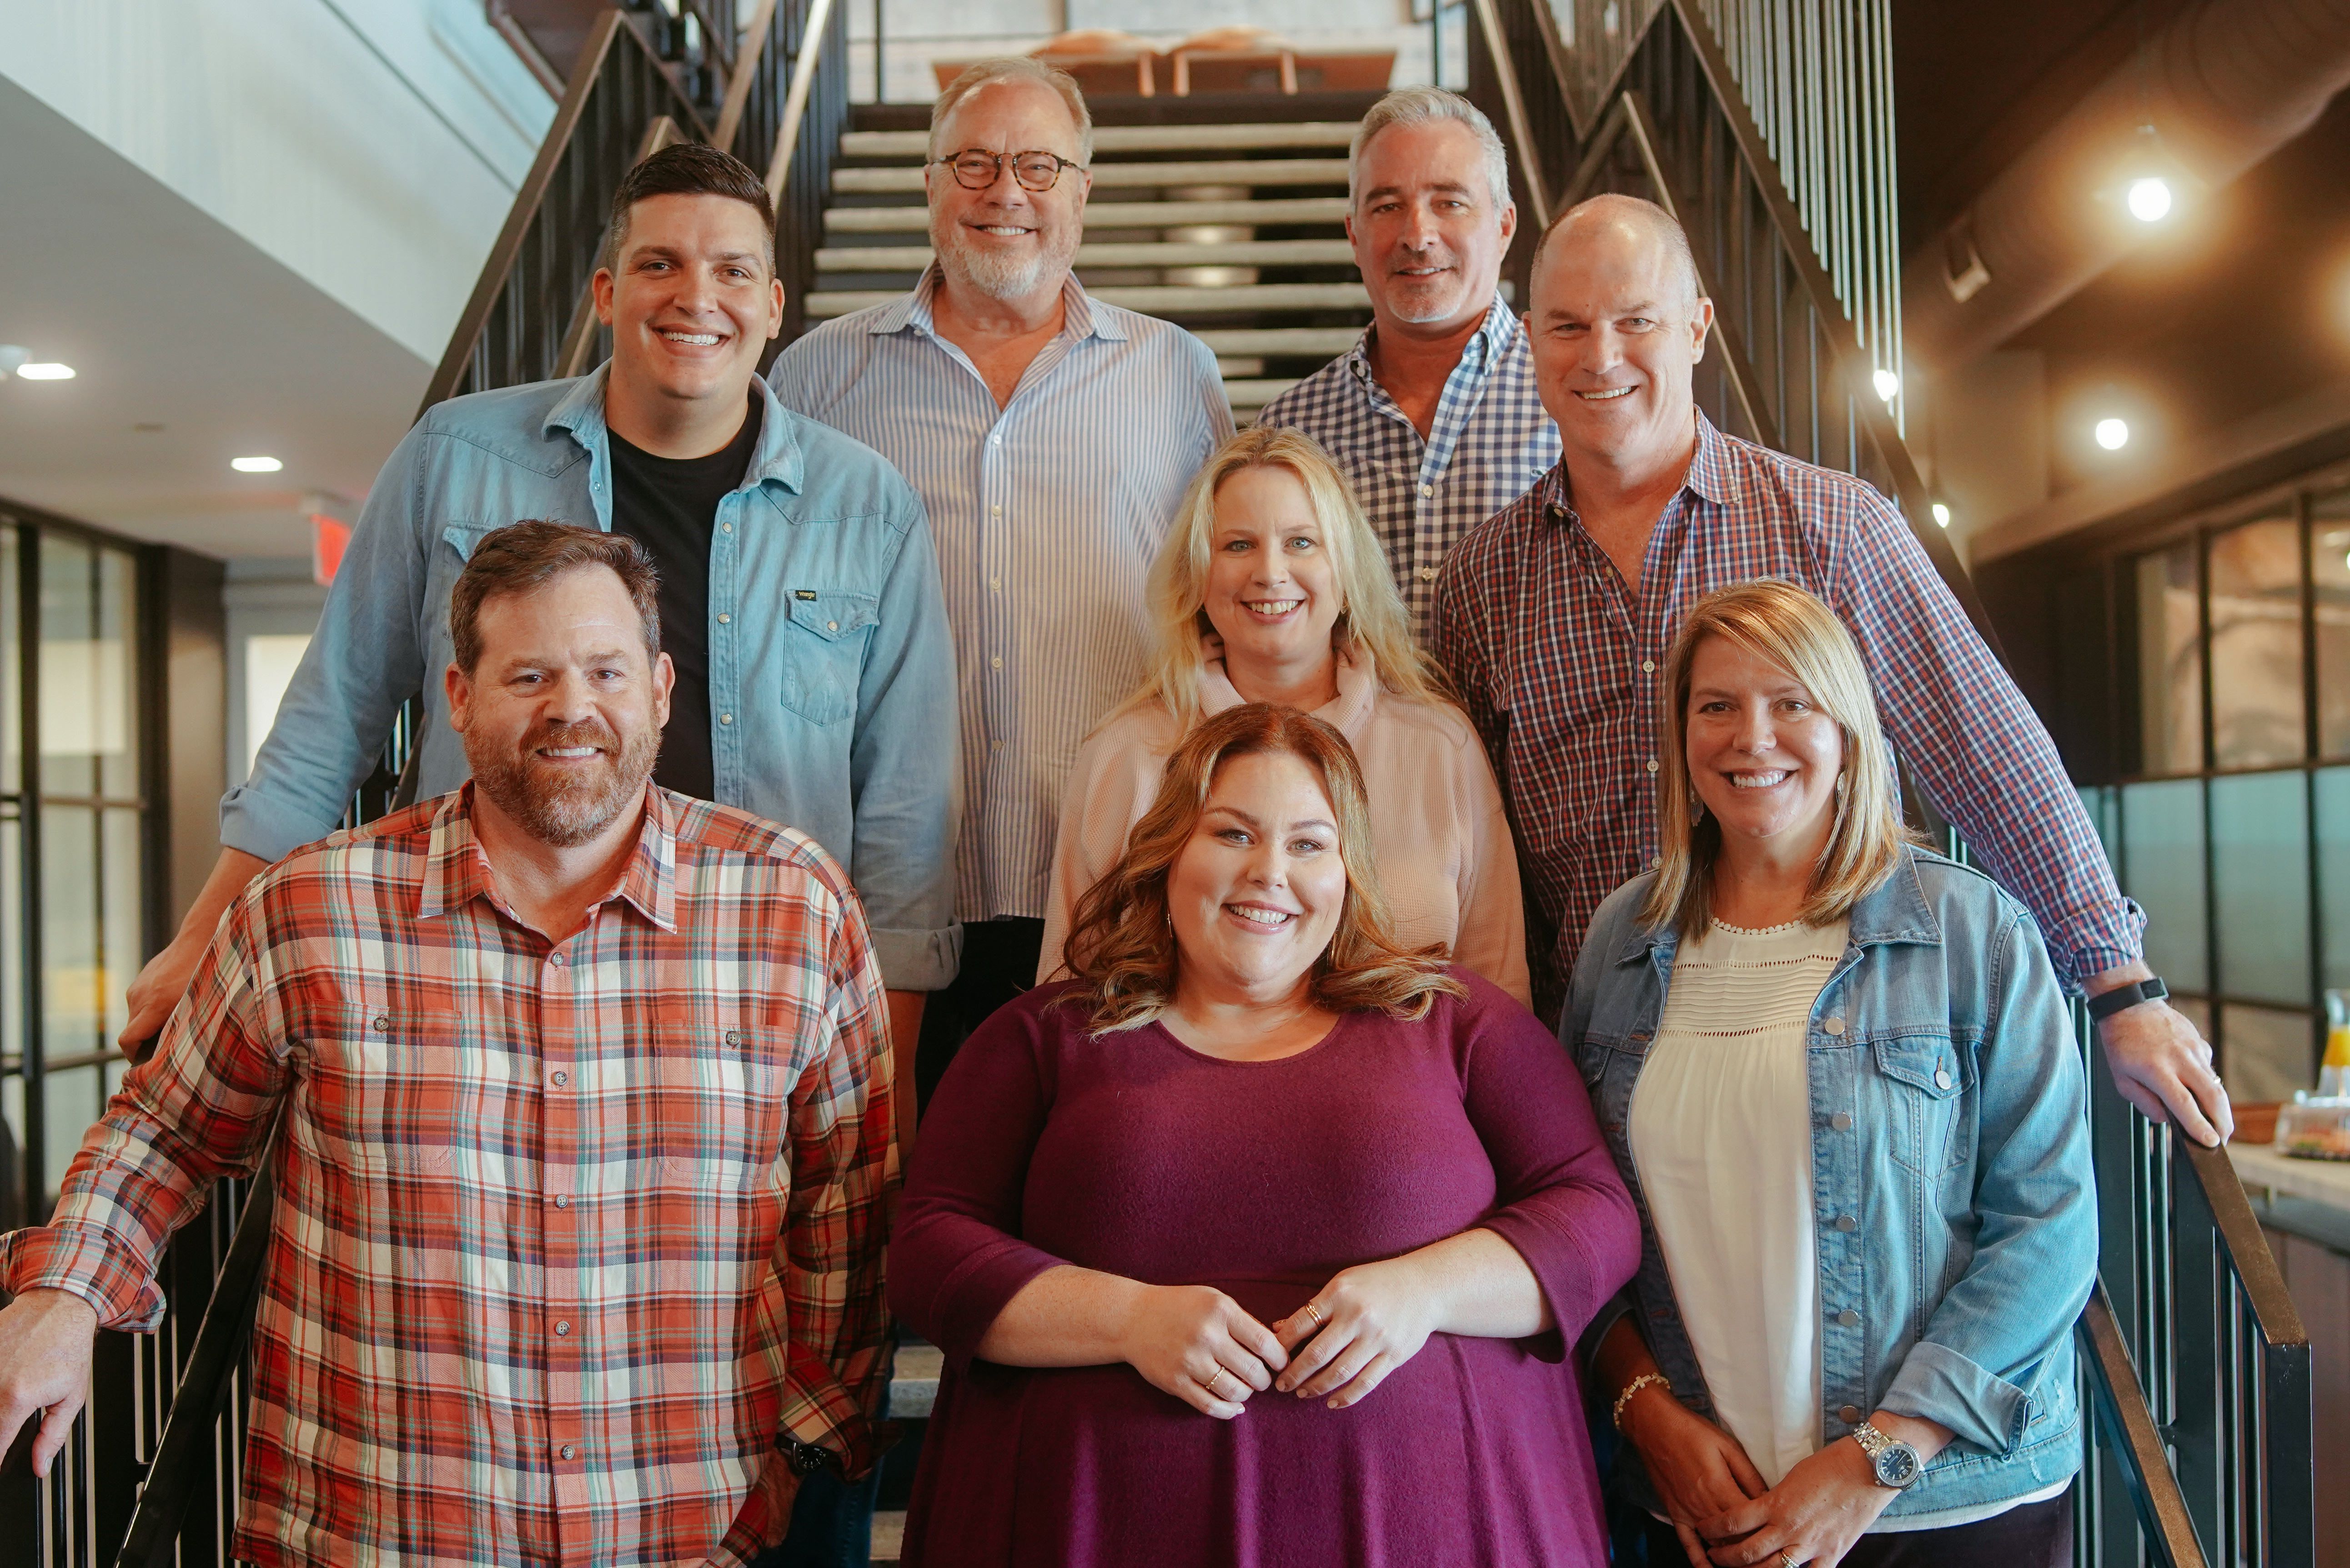 Chrissy Metz Signs Record Deal with UMG Nashville